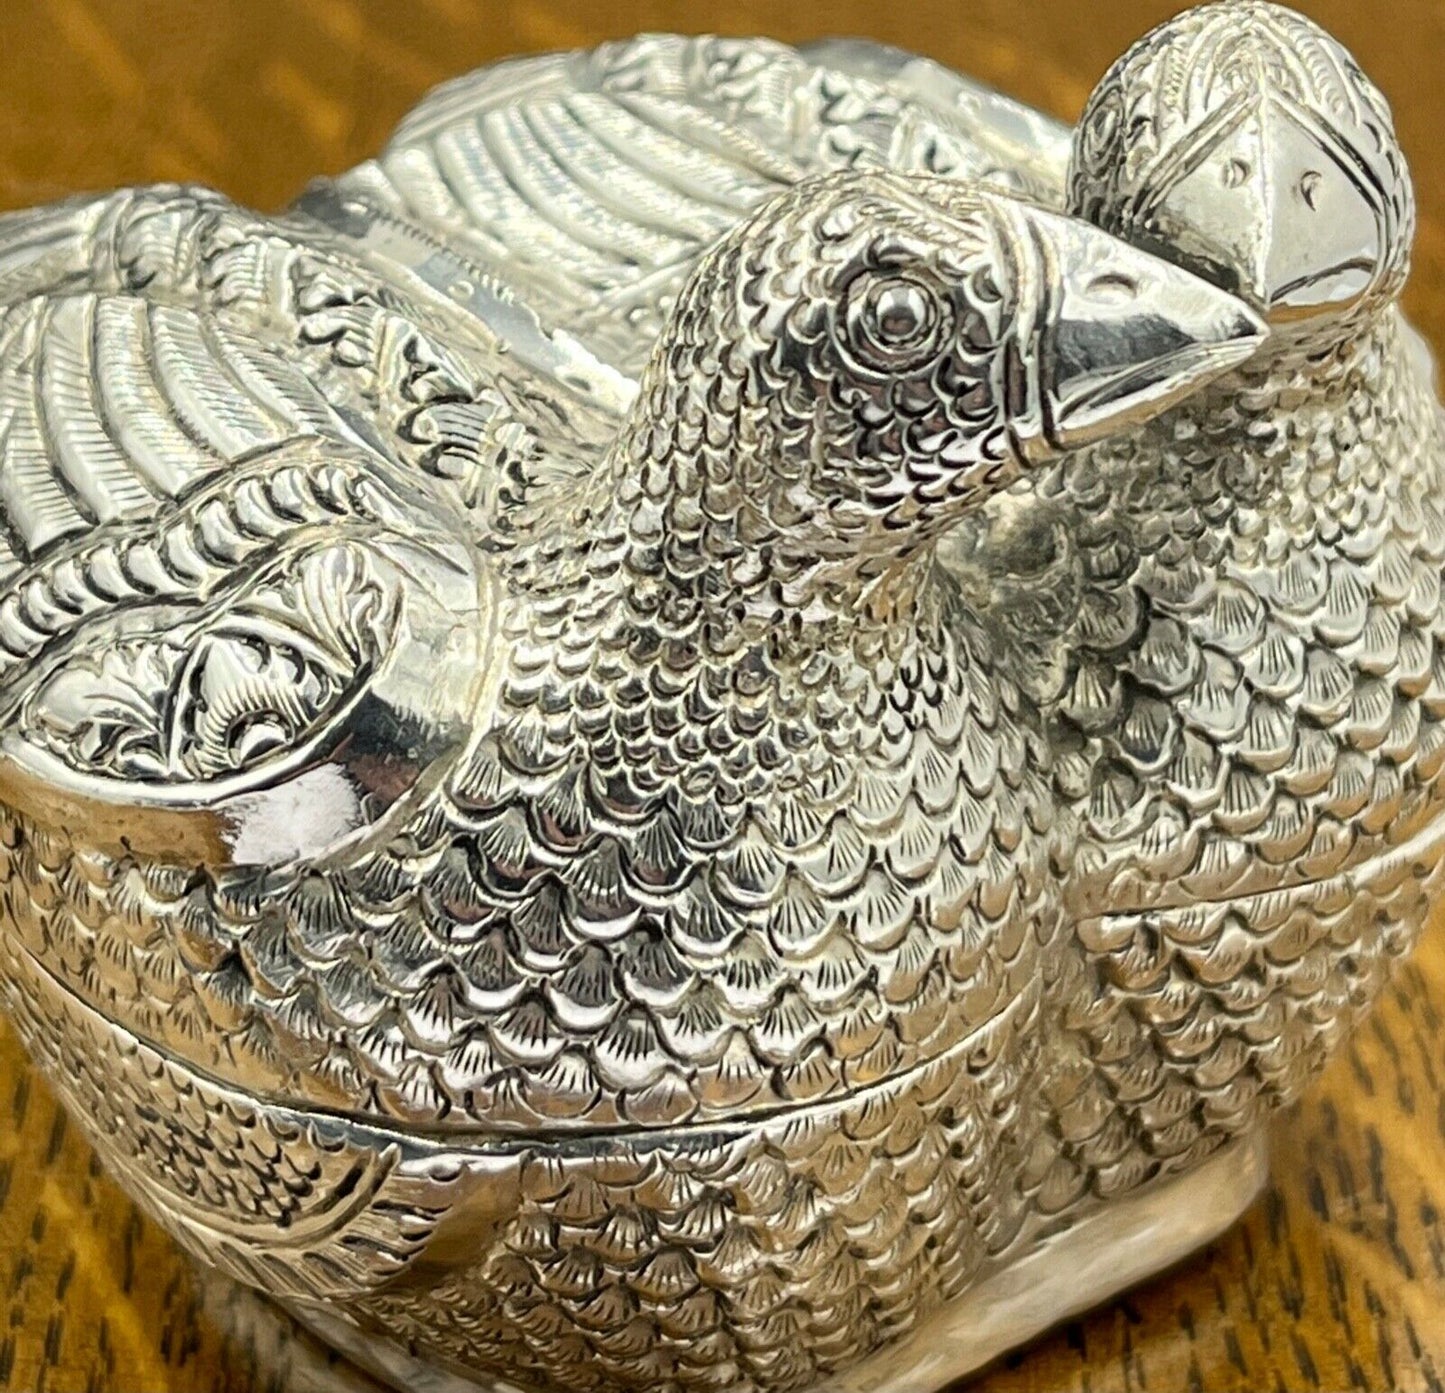 A Cambodian silver betel nut box pair of birds kissing T90